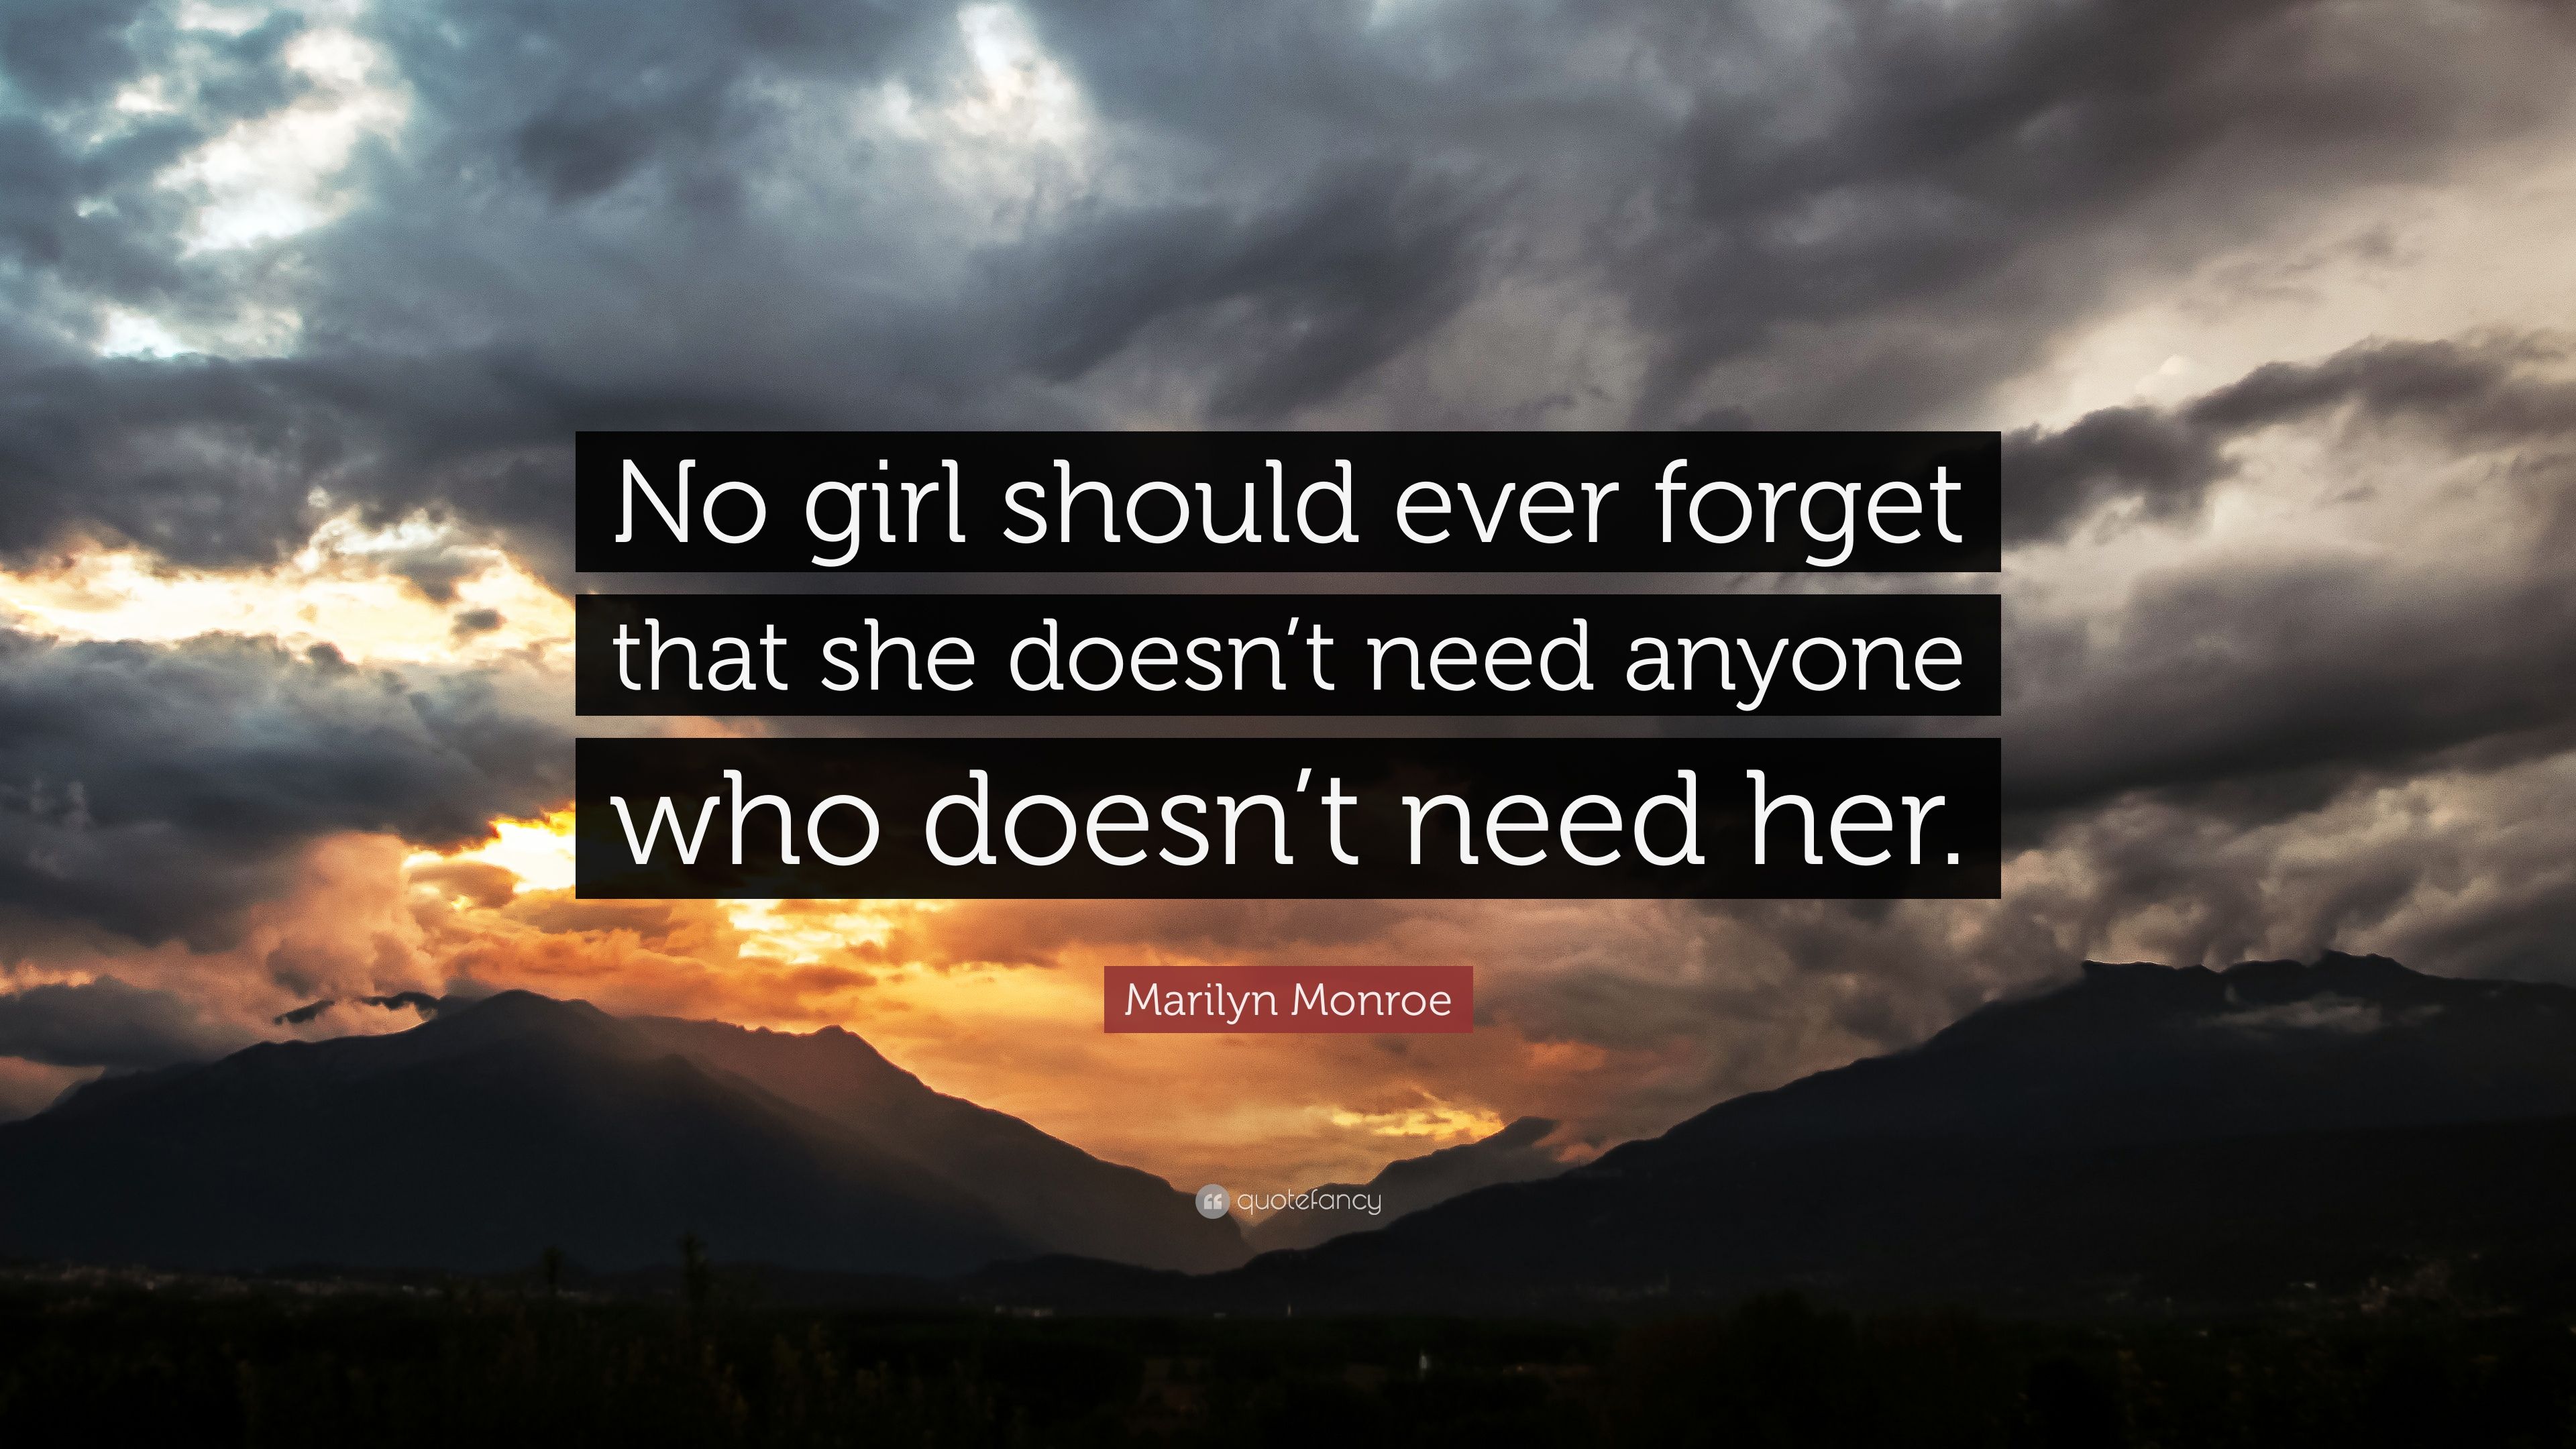 Marilyn Monroe Quote: “No girl should ever forget that she doesn't need anyone who doesn't need her.” (22 wallpaper)